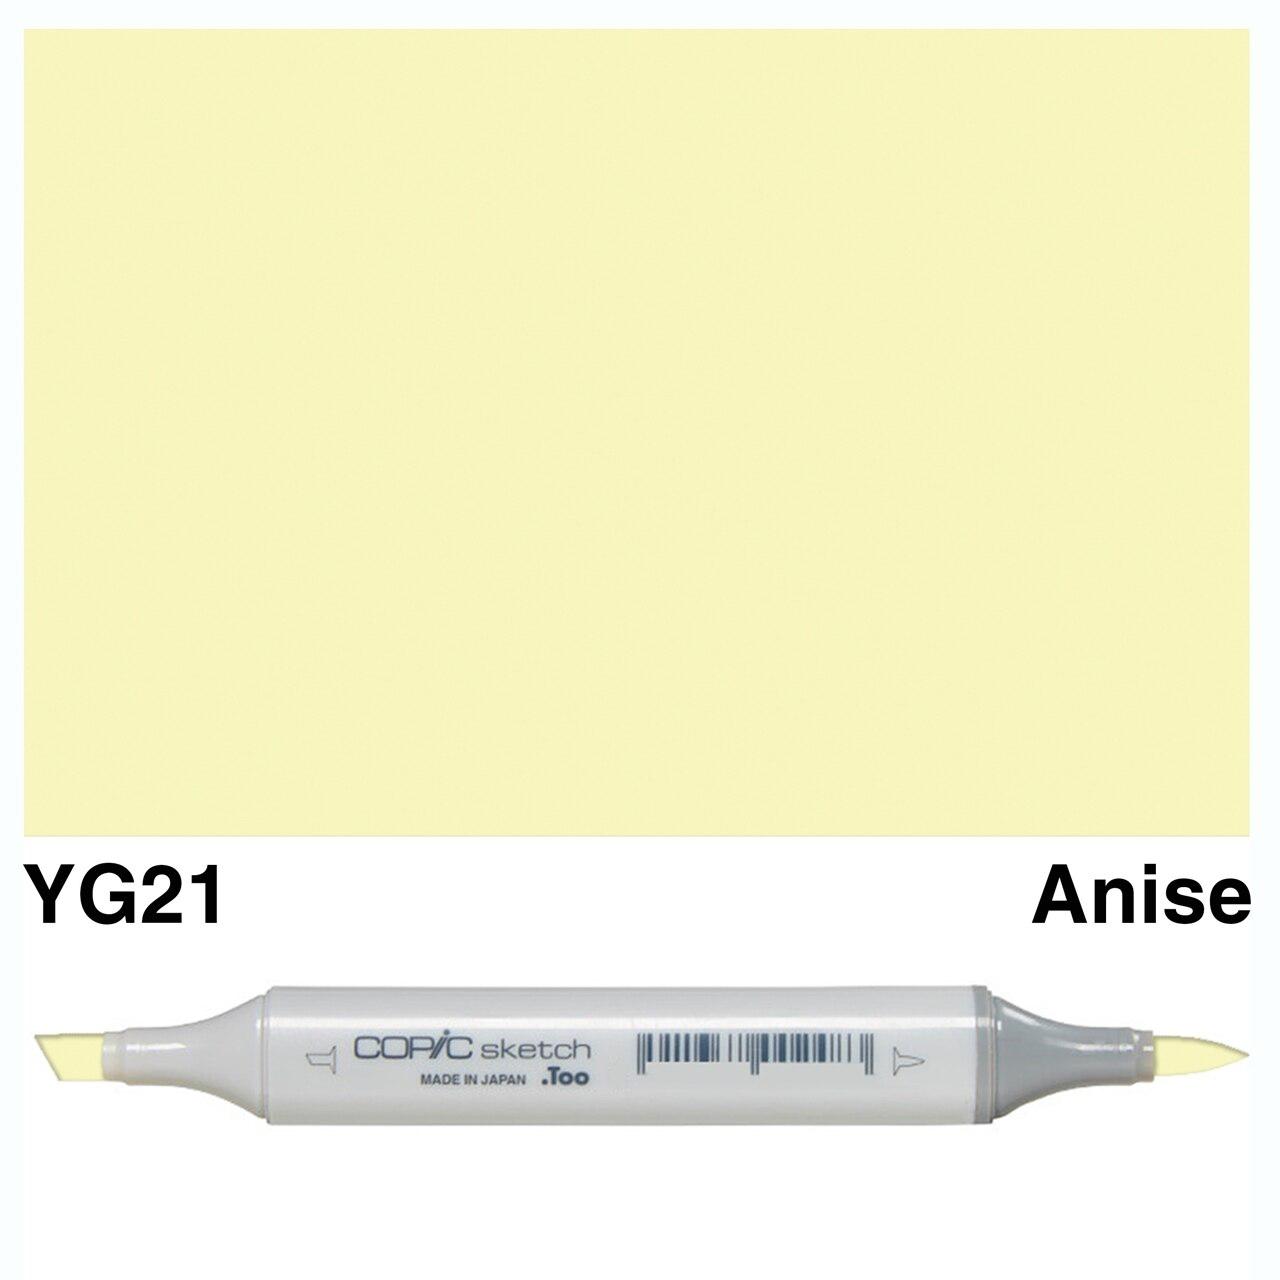 Copic - Sketch Marker - Anise - YG21-ScrapbookPal